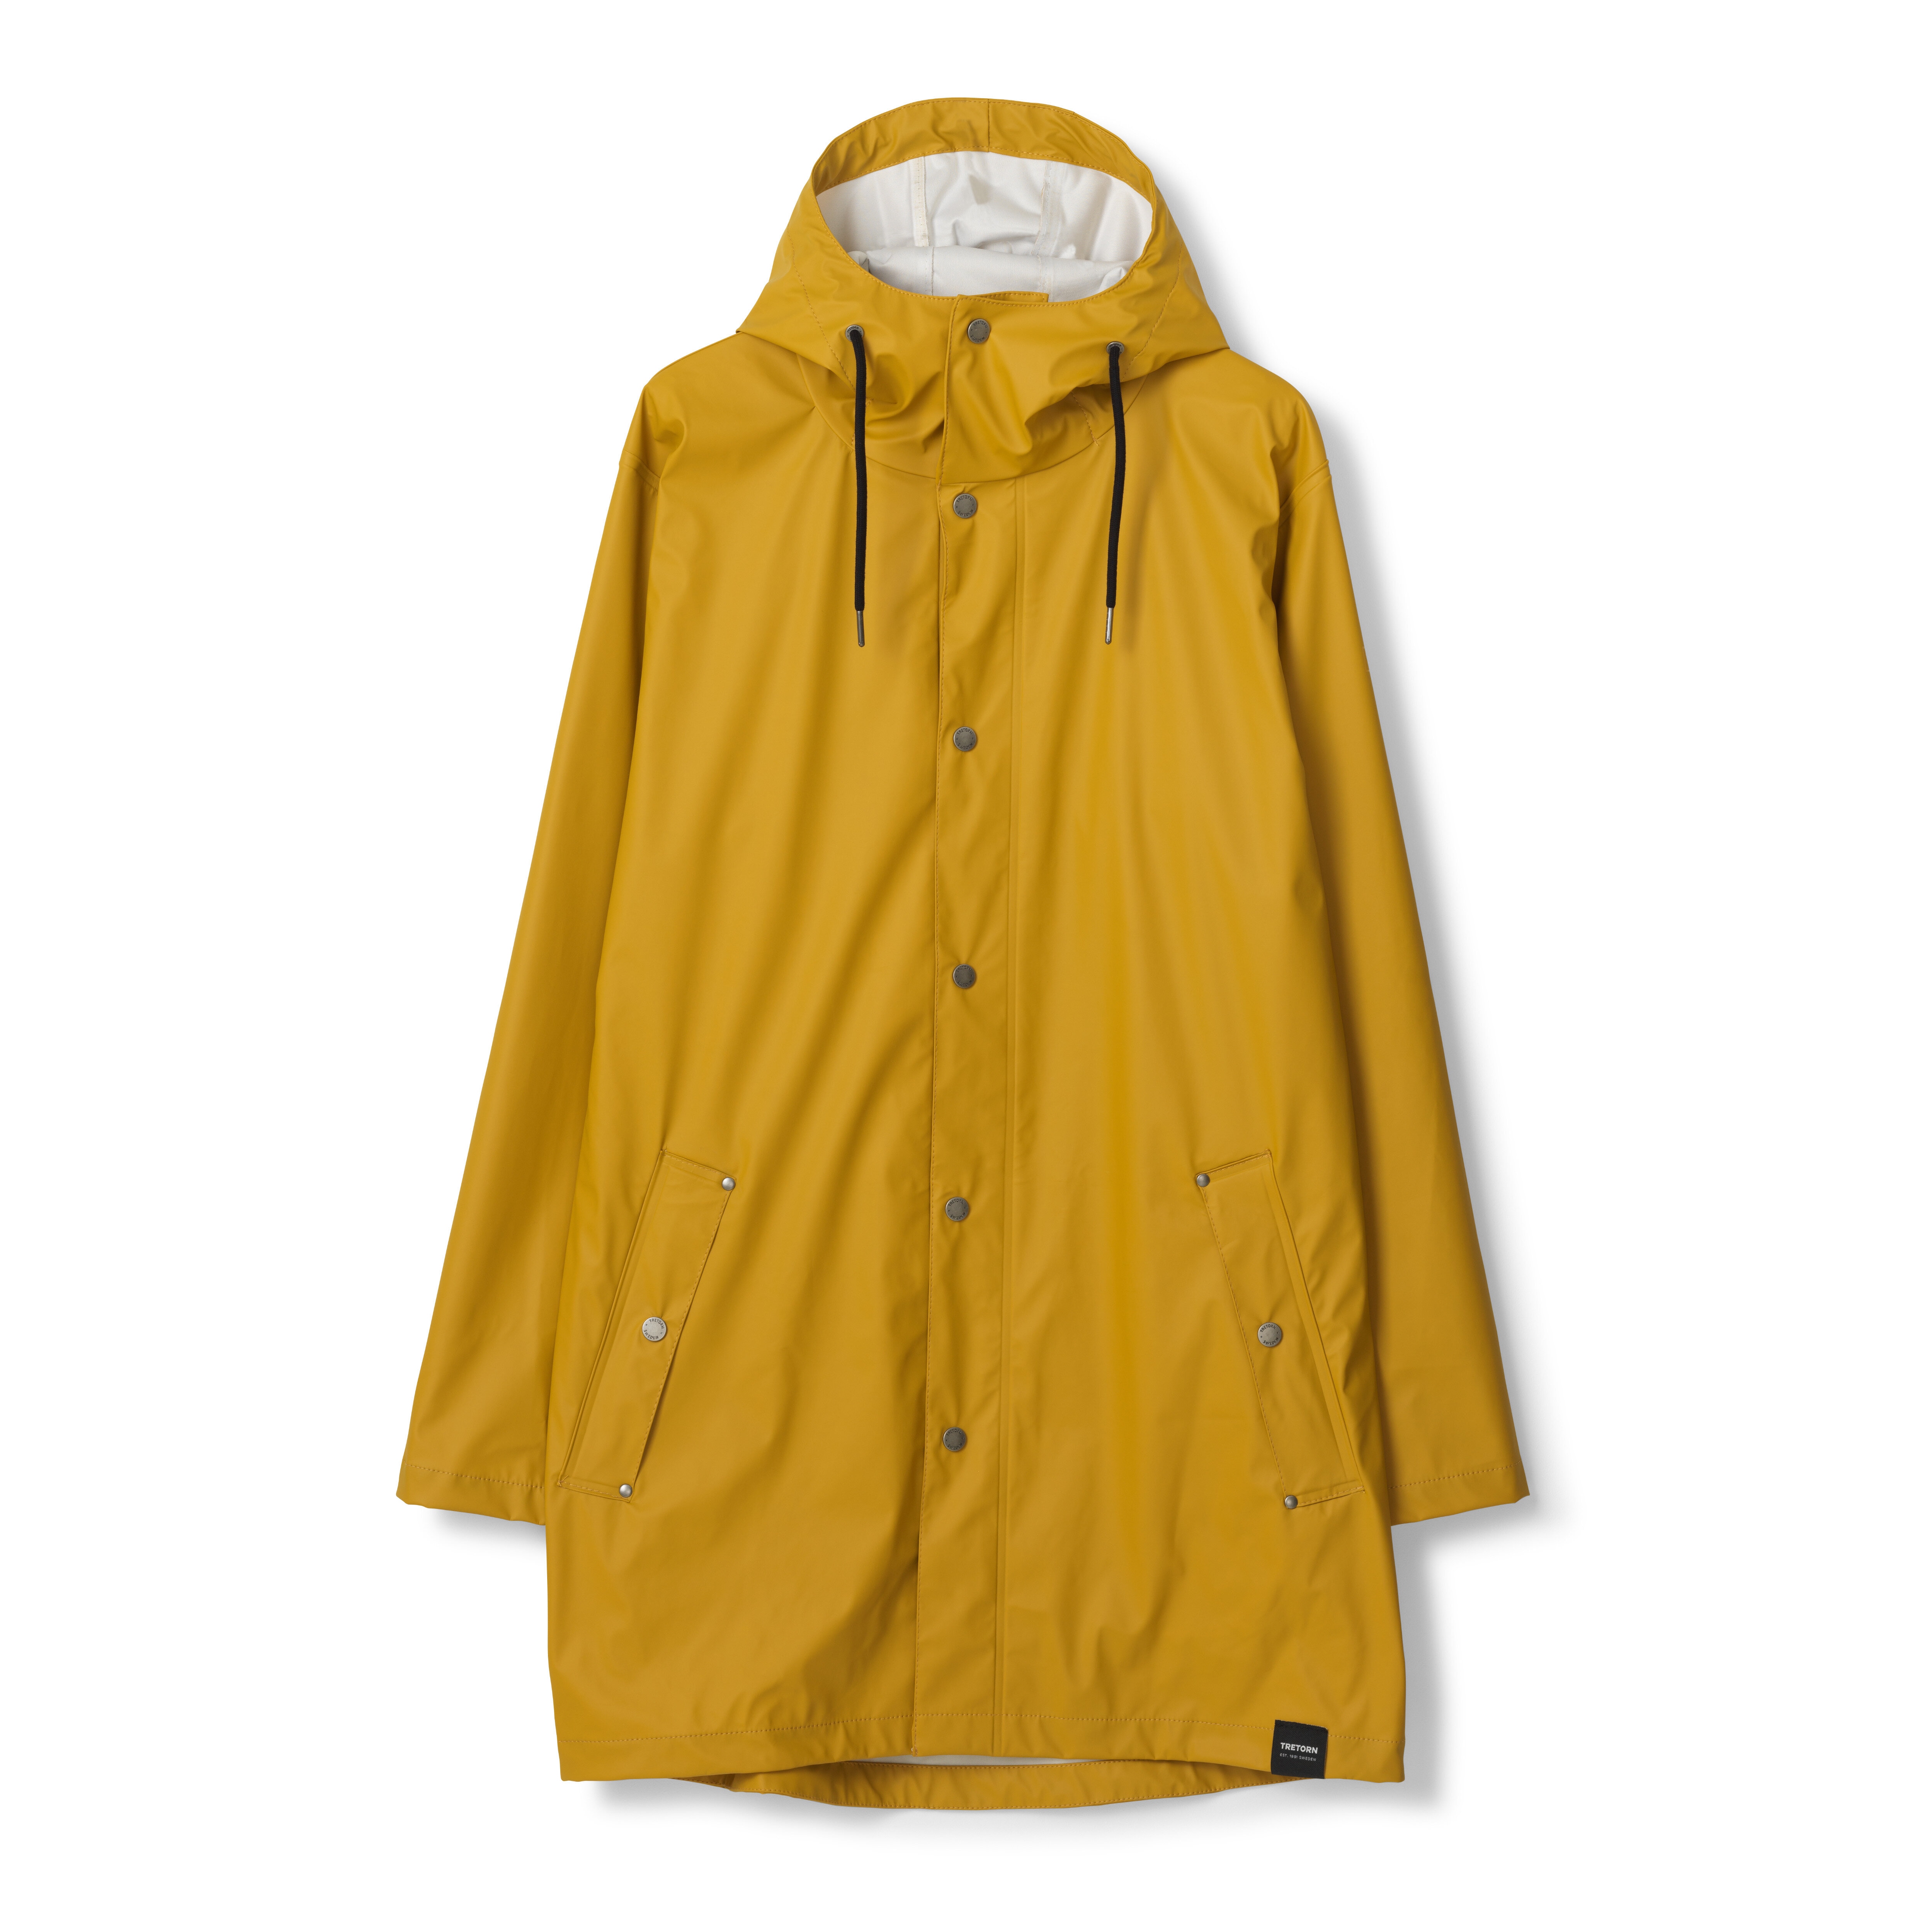 Wings Plus Eco rain jacket by Tretorn for men and women in the colour yellow